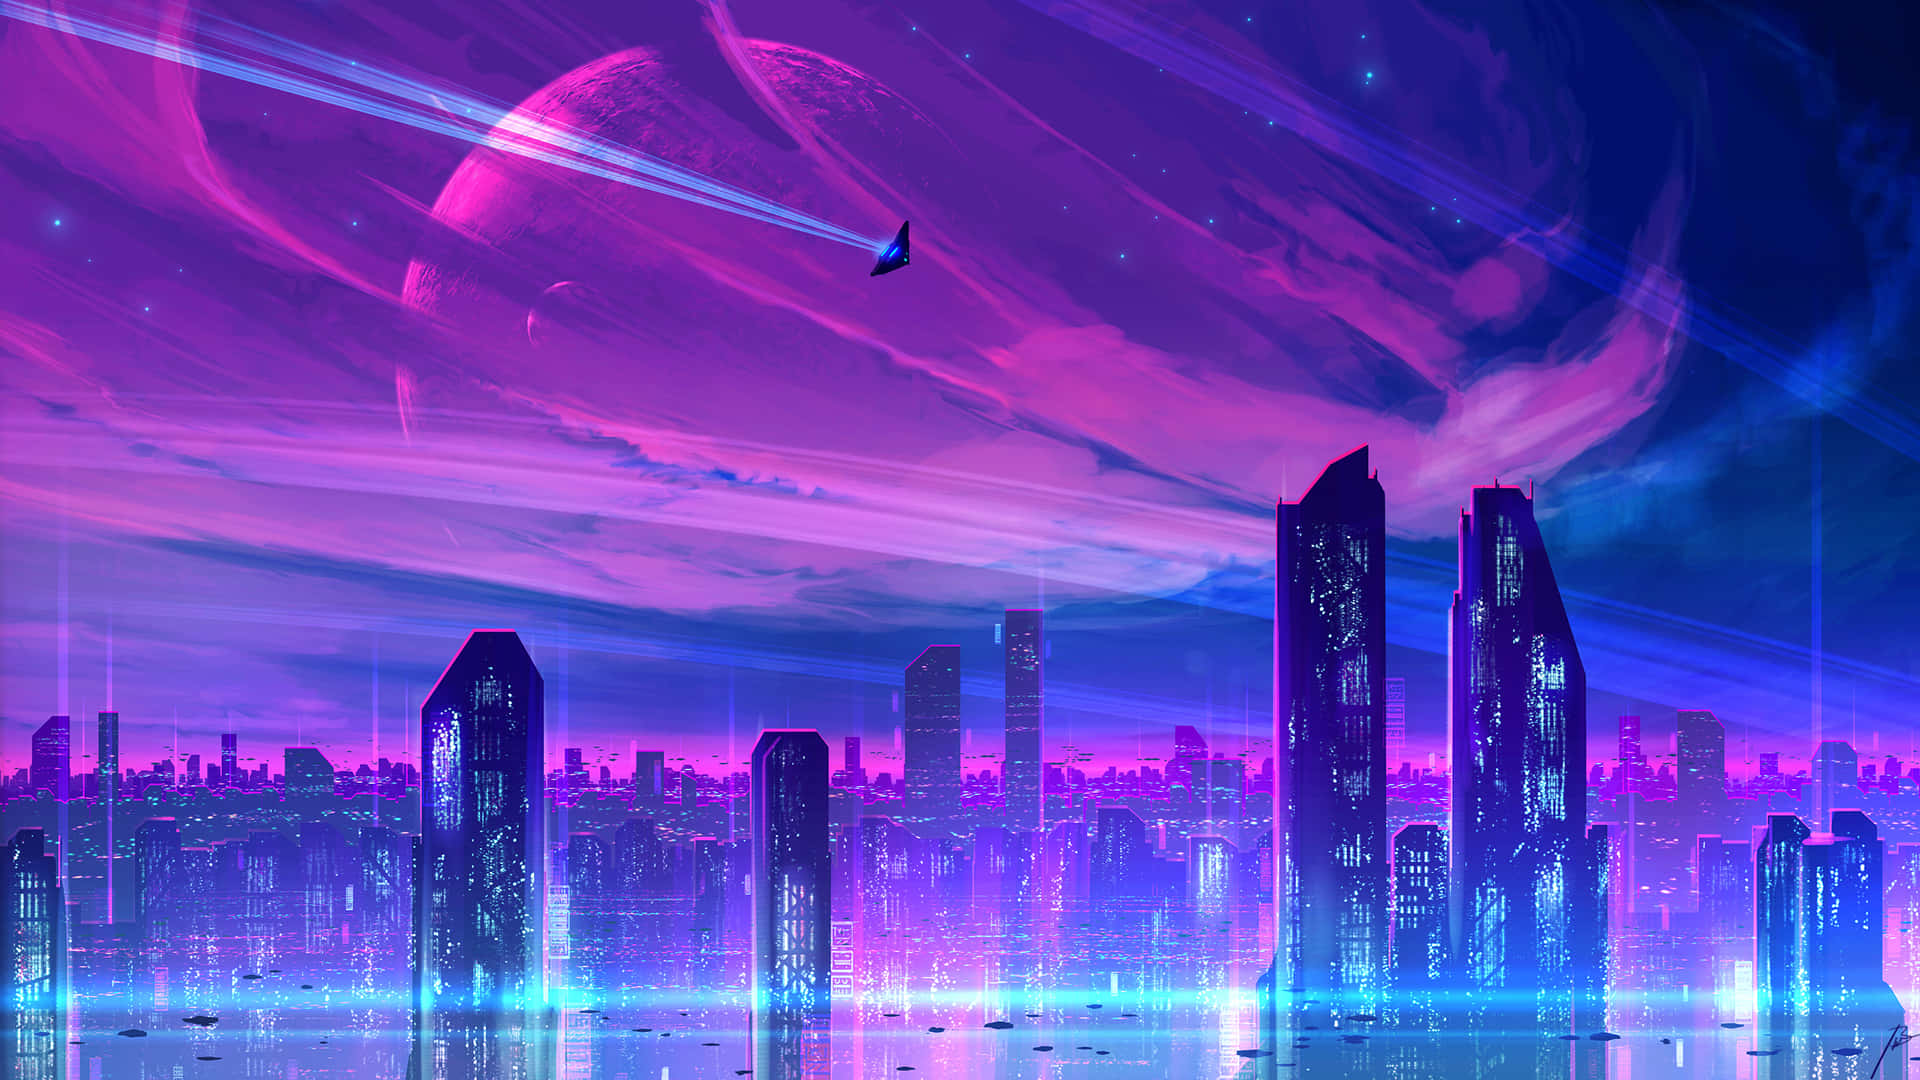 Explore the neon shimmering sights of Synthwave City Wallpaper